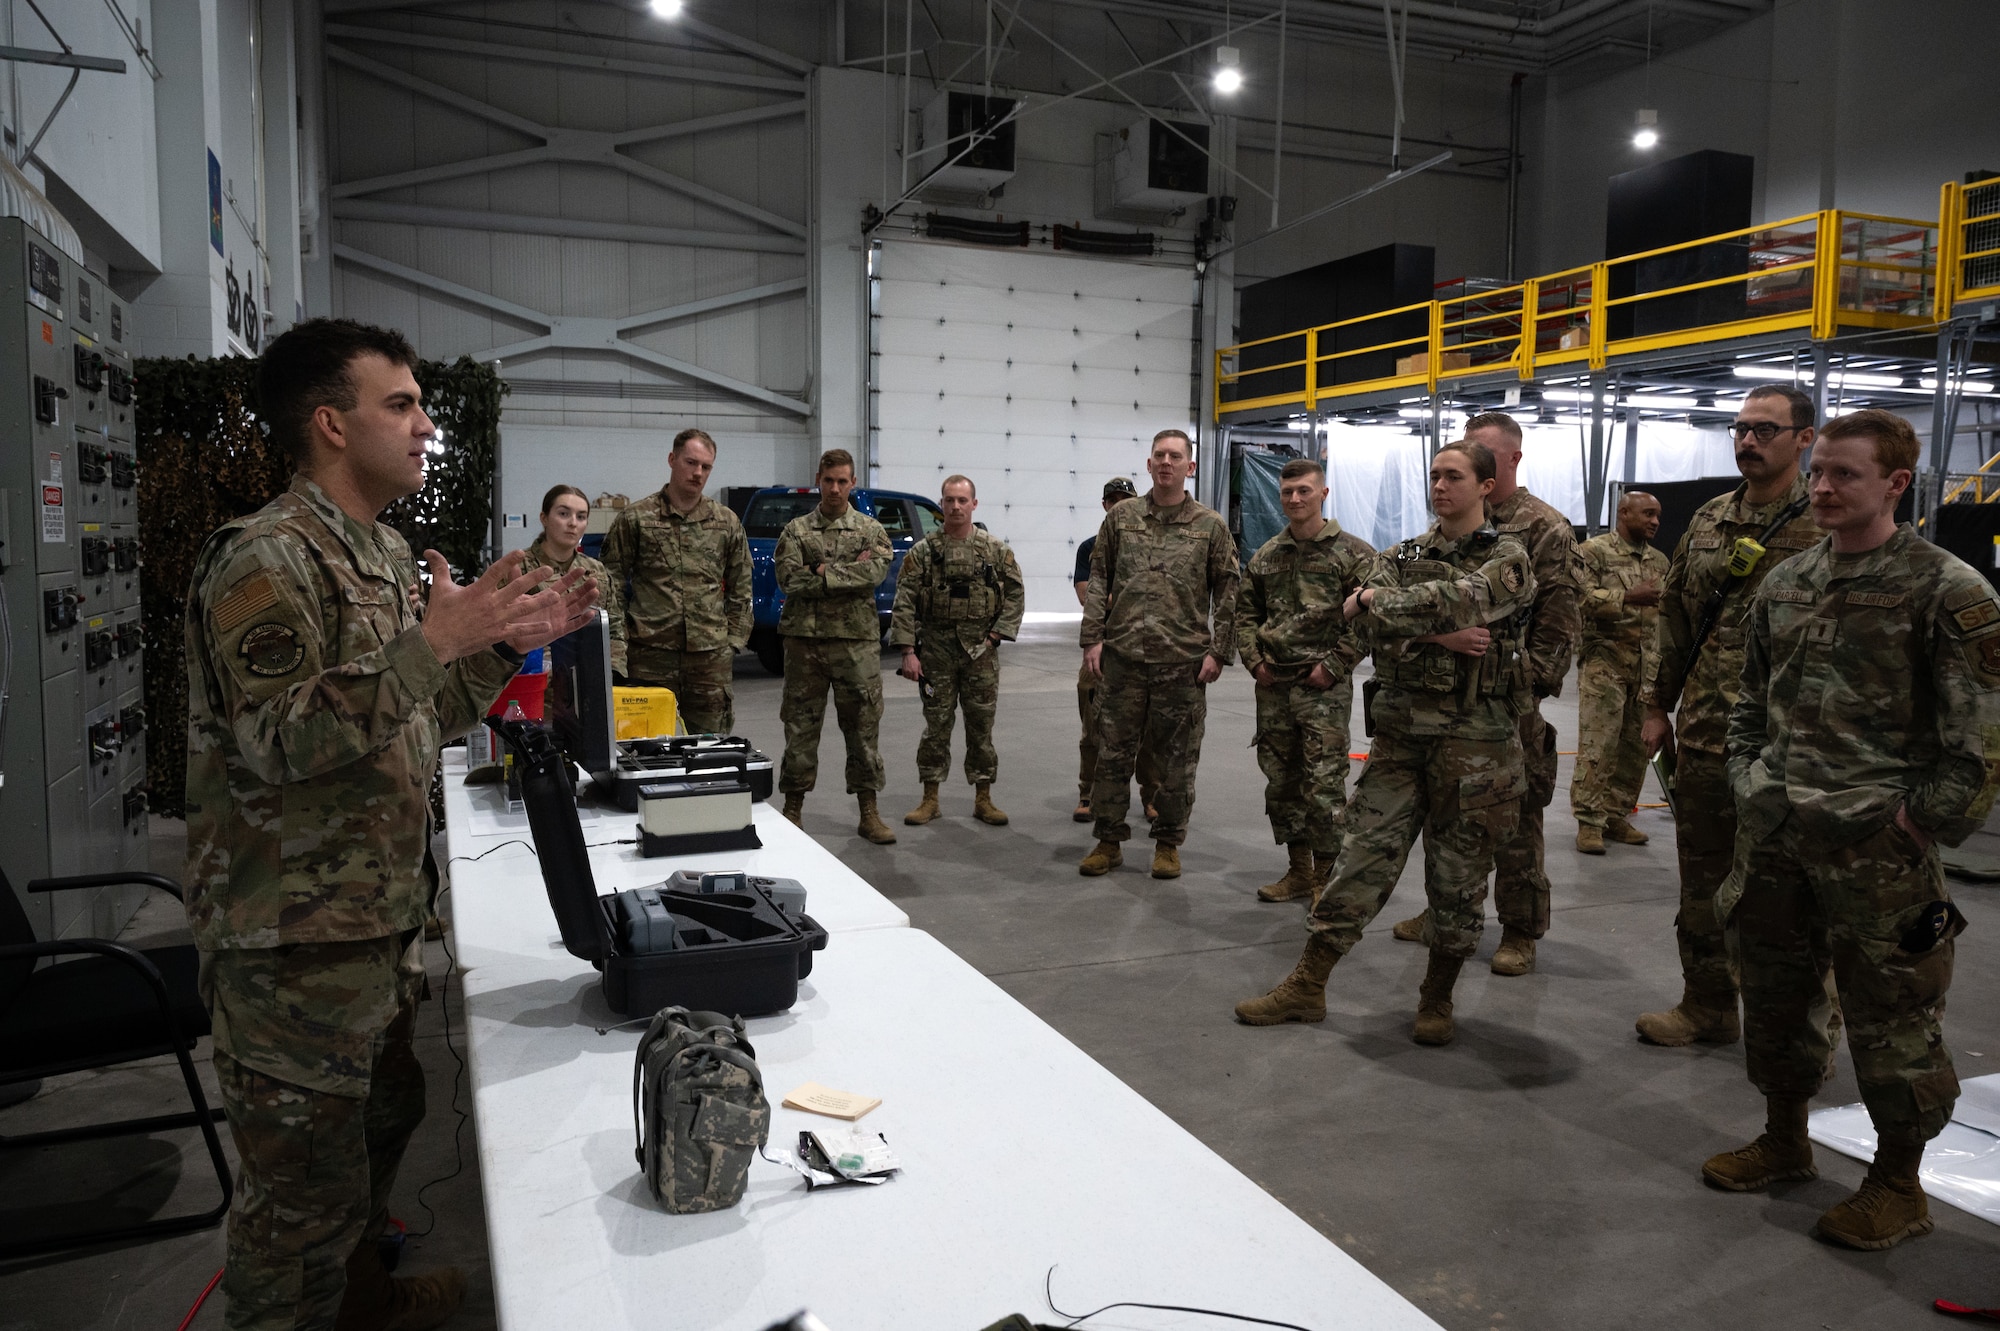 A uniformed military member, left, briefs a larger group of military personnel in a warehouse.